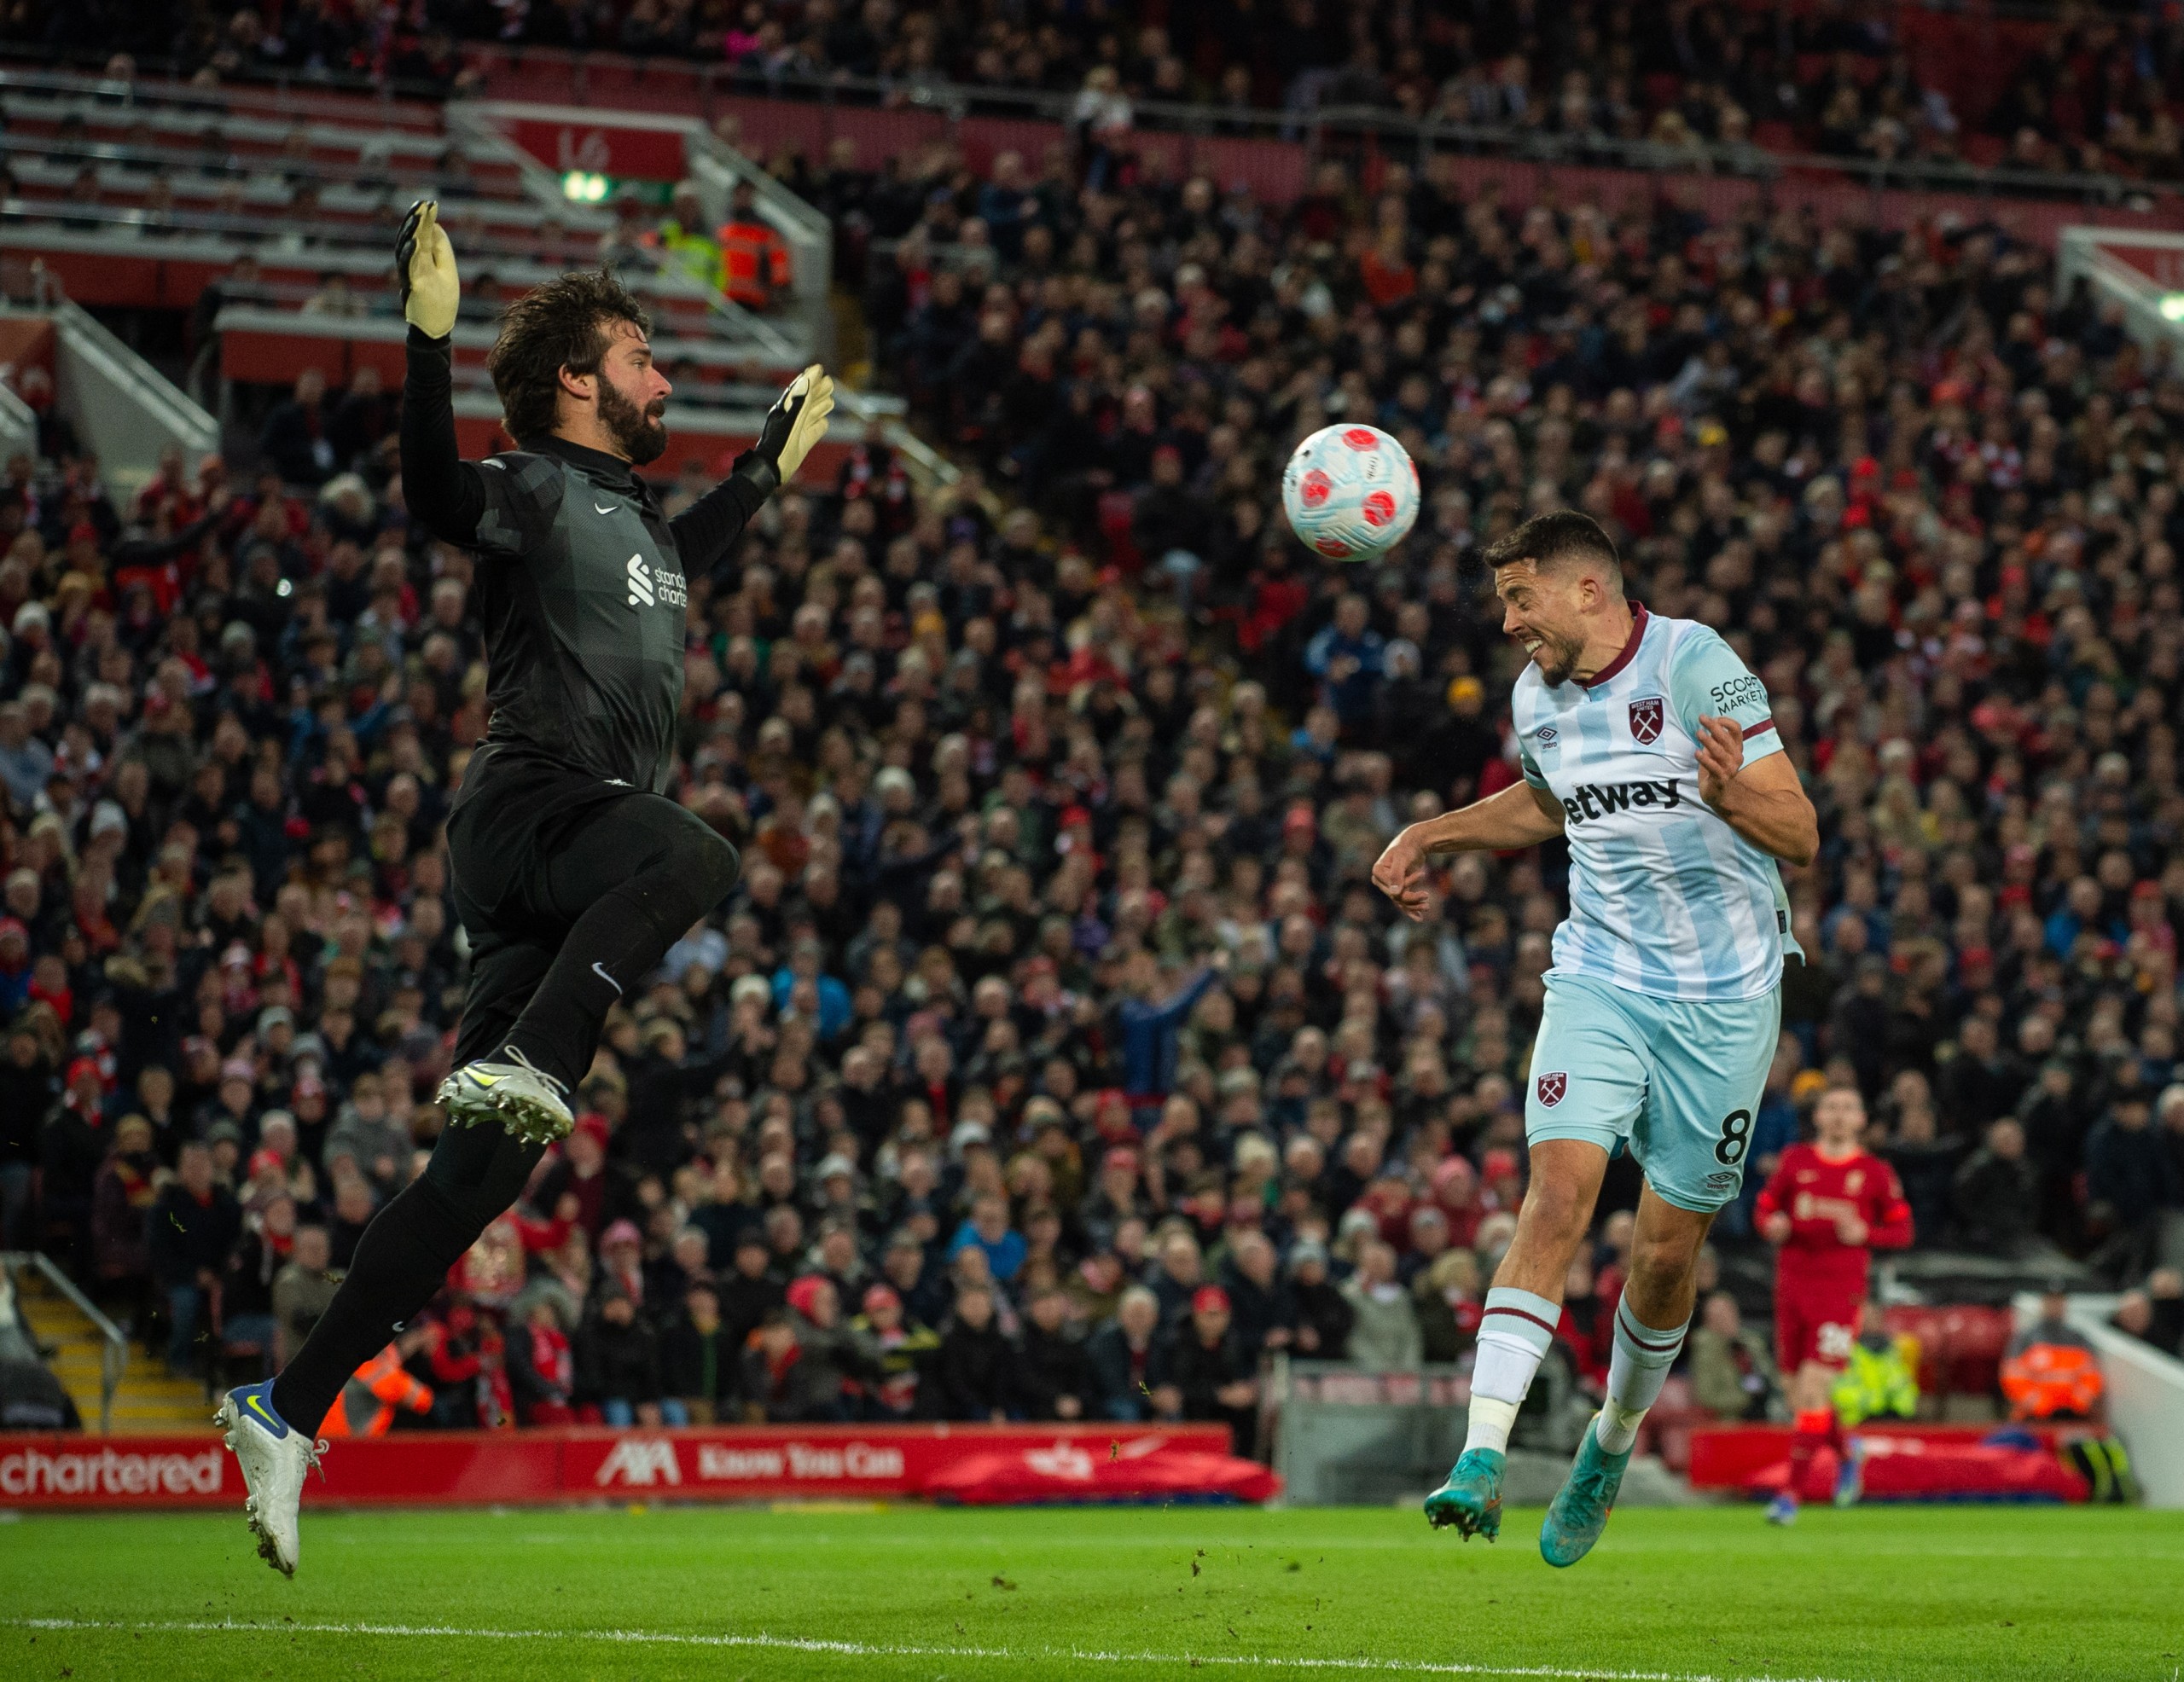 epa09804367 Liverpool's goalkeeper Alisson Becker (L) in action with West Ham United's Pablo Fornals (R) during the English Premier League soccer match between Liverpool FC and West Ham United at Anfield, Liverpool, Britain, 05 March 2022.  EPA/PETER POWELL EDITORIAL USE ONLY. No use with unauthorized audio, video, data, fixture lists, club/league logos or 'live' services. Online in-match use limited to 120 images, no video emulation. No use in betting, games or single club/league/player publications.